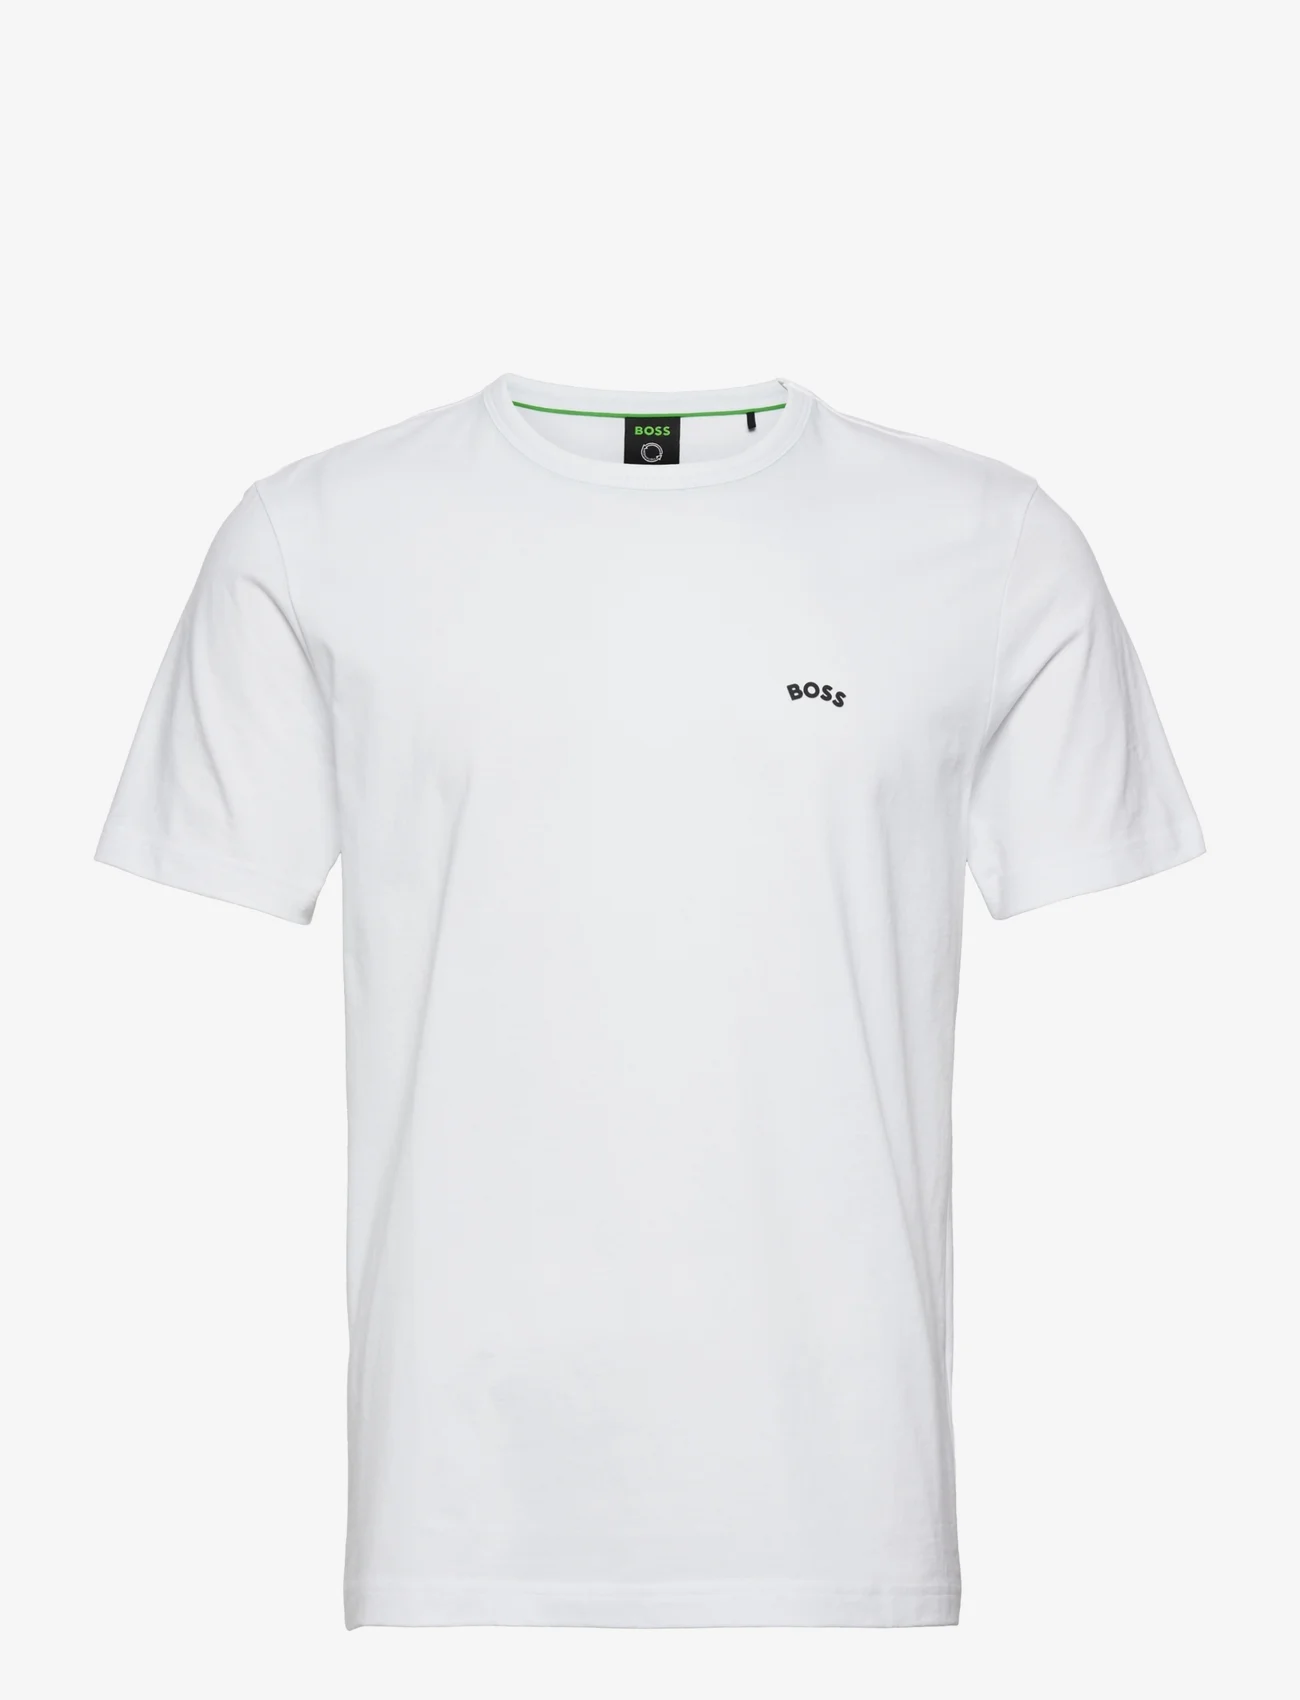 BOSS - Tee Curved - t-shirts - white - 1